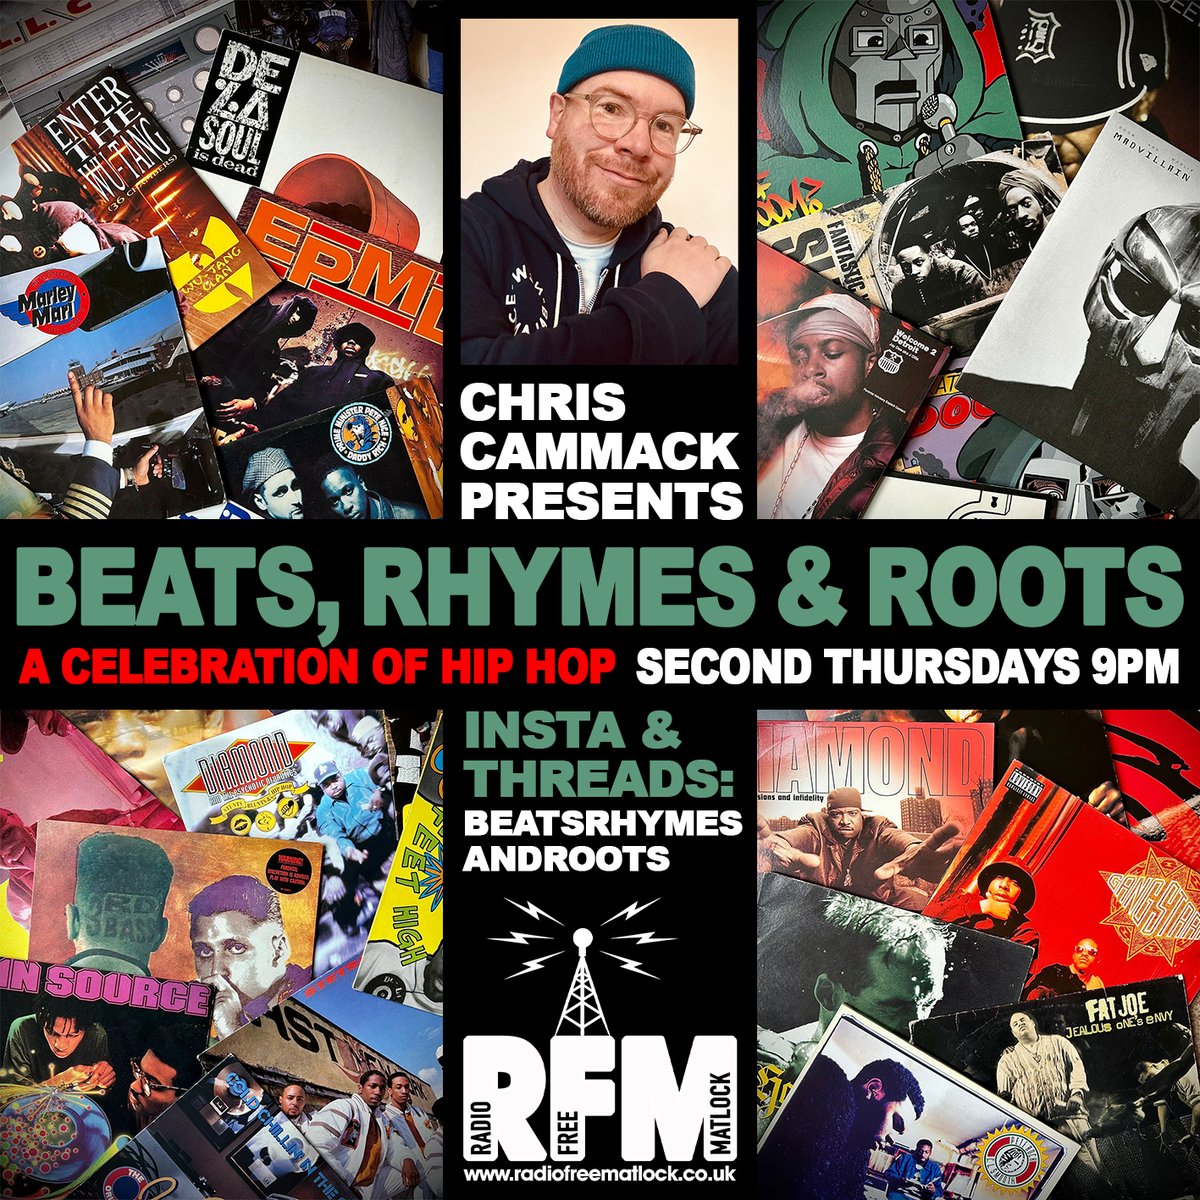 Your lunchtime reminder... TONIGHT on RFM ⚡️ 7pm-9 : 'Sound Waves' with @mixless. Music old and new from across the spectrum 9pm-11 : 'Beats, Rhymes & Roots' with Chris Cammack + special guest mix from Ray West @RedApples45 Tune in >> radiofreematlock.co.uk